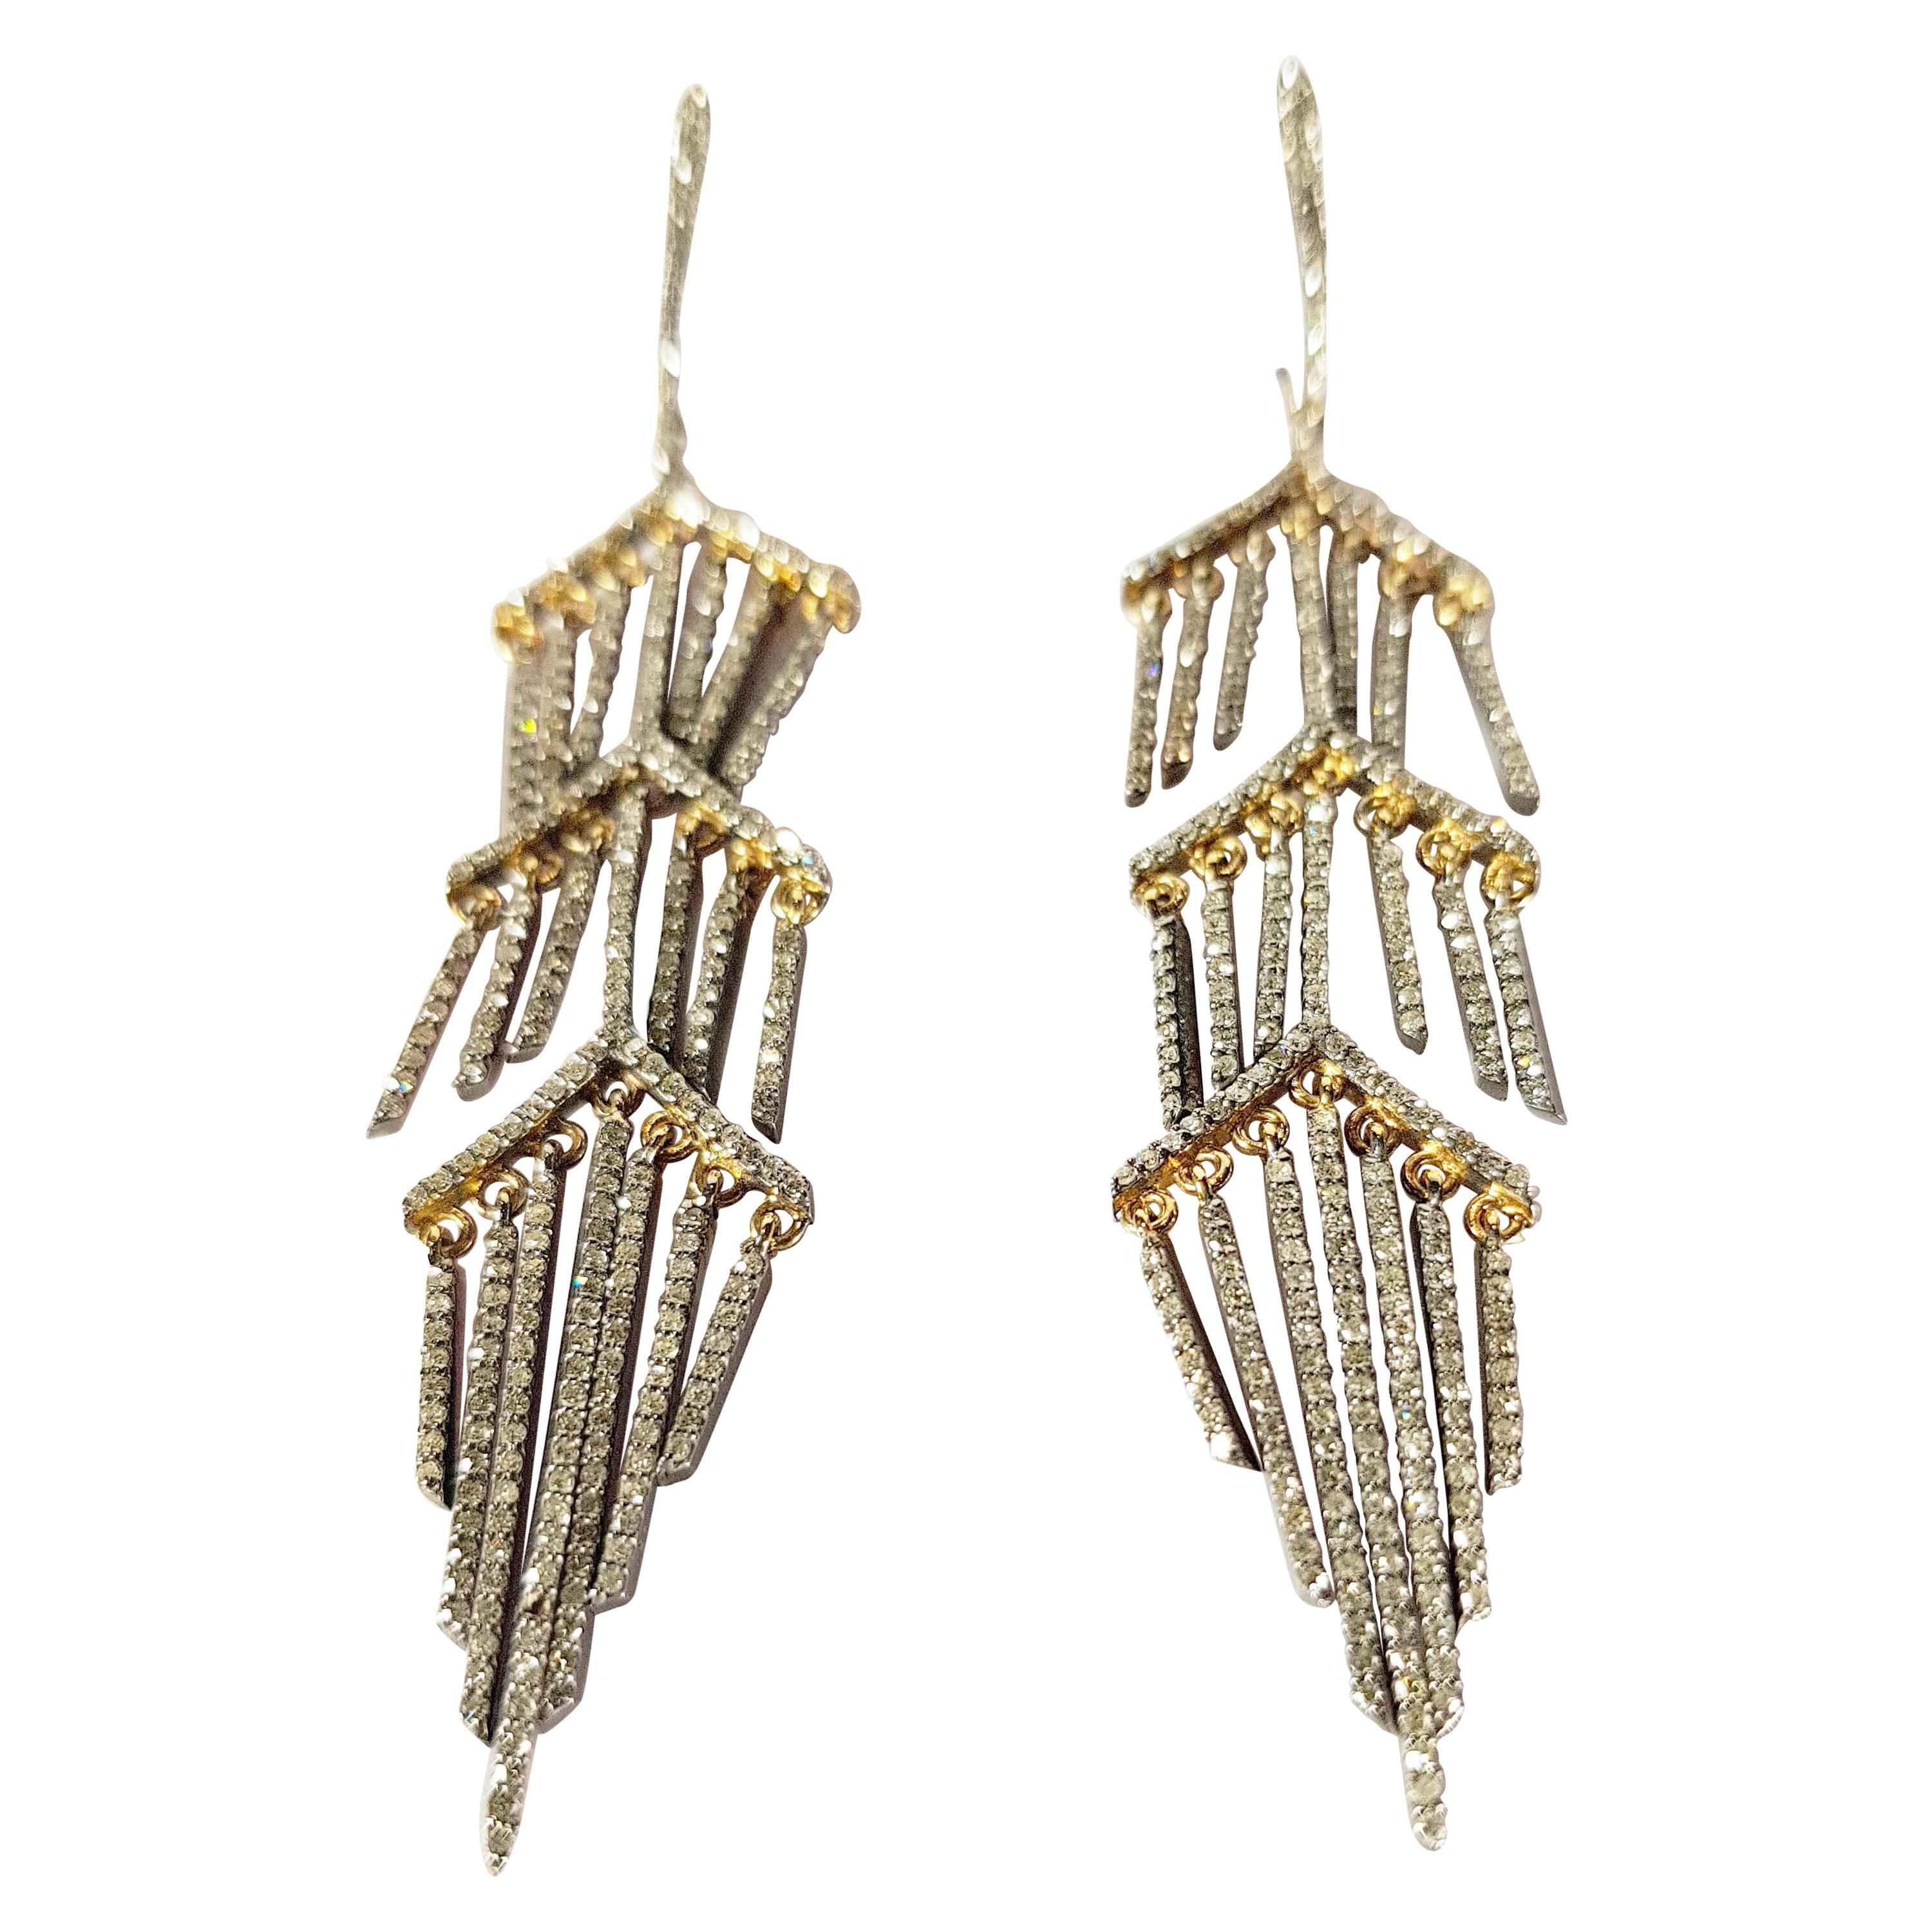 Chandelier 14 Karat Gold and Silver Earrings with Diamonds